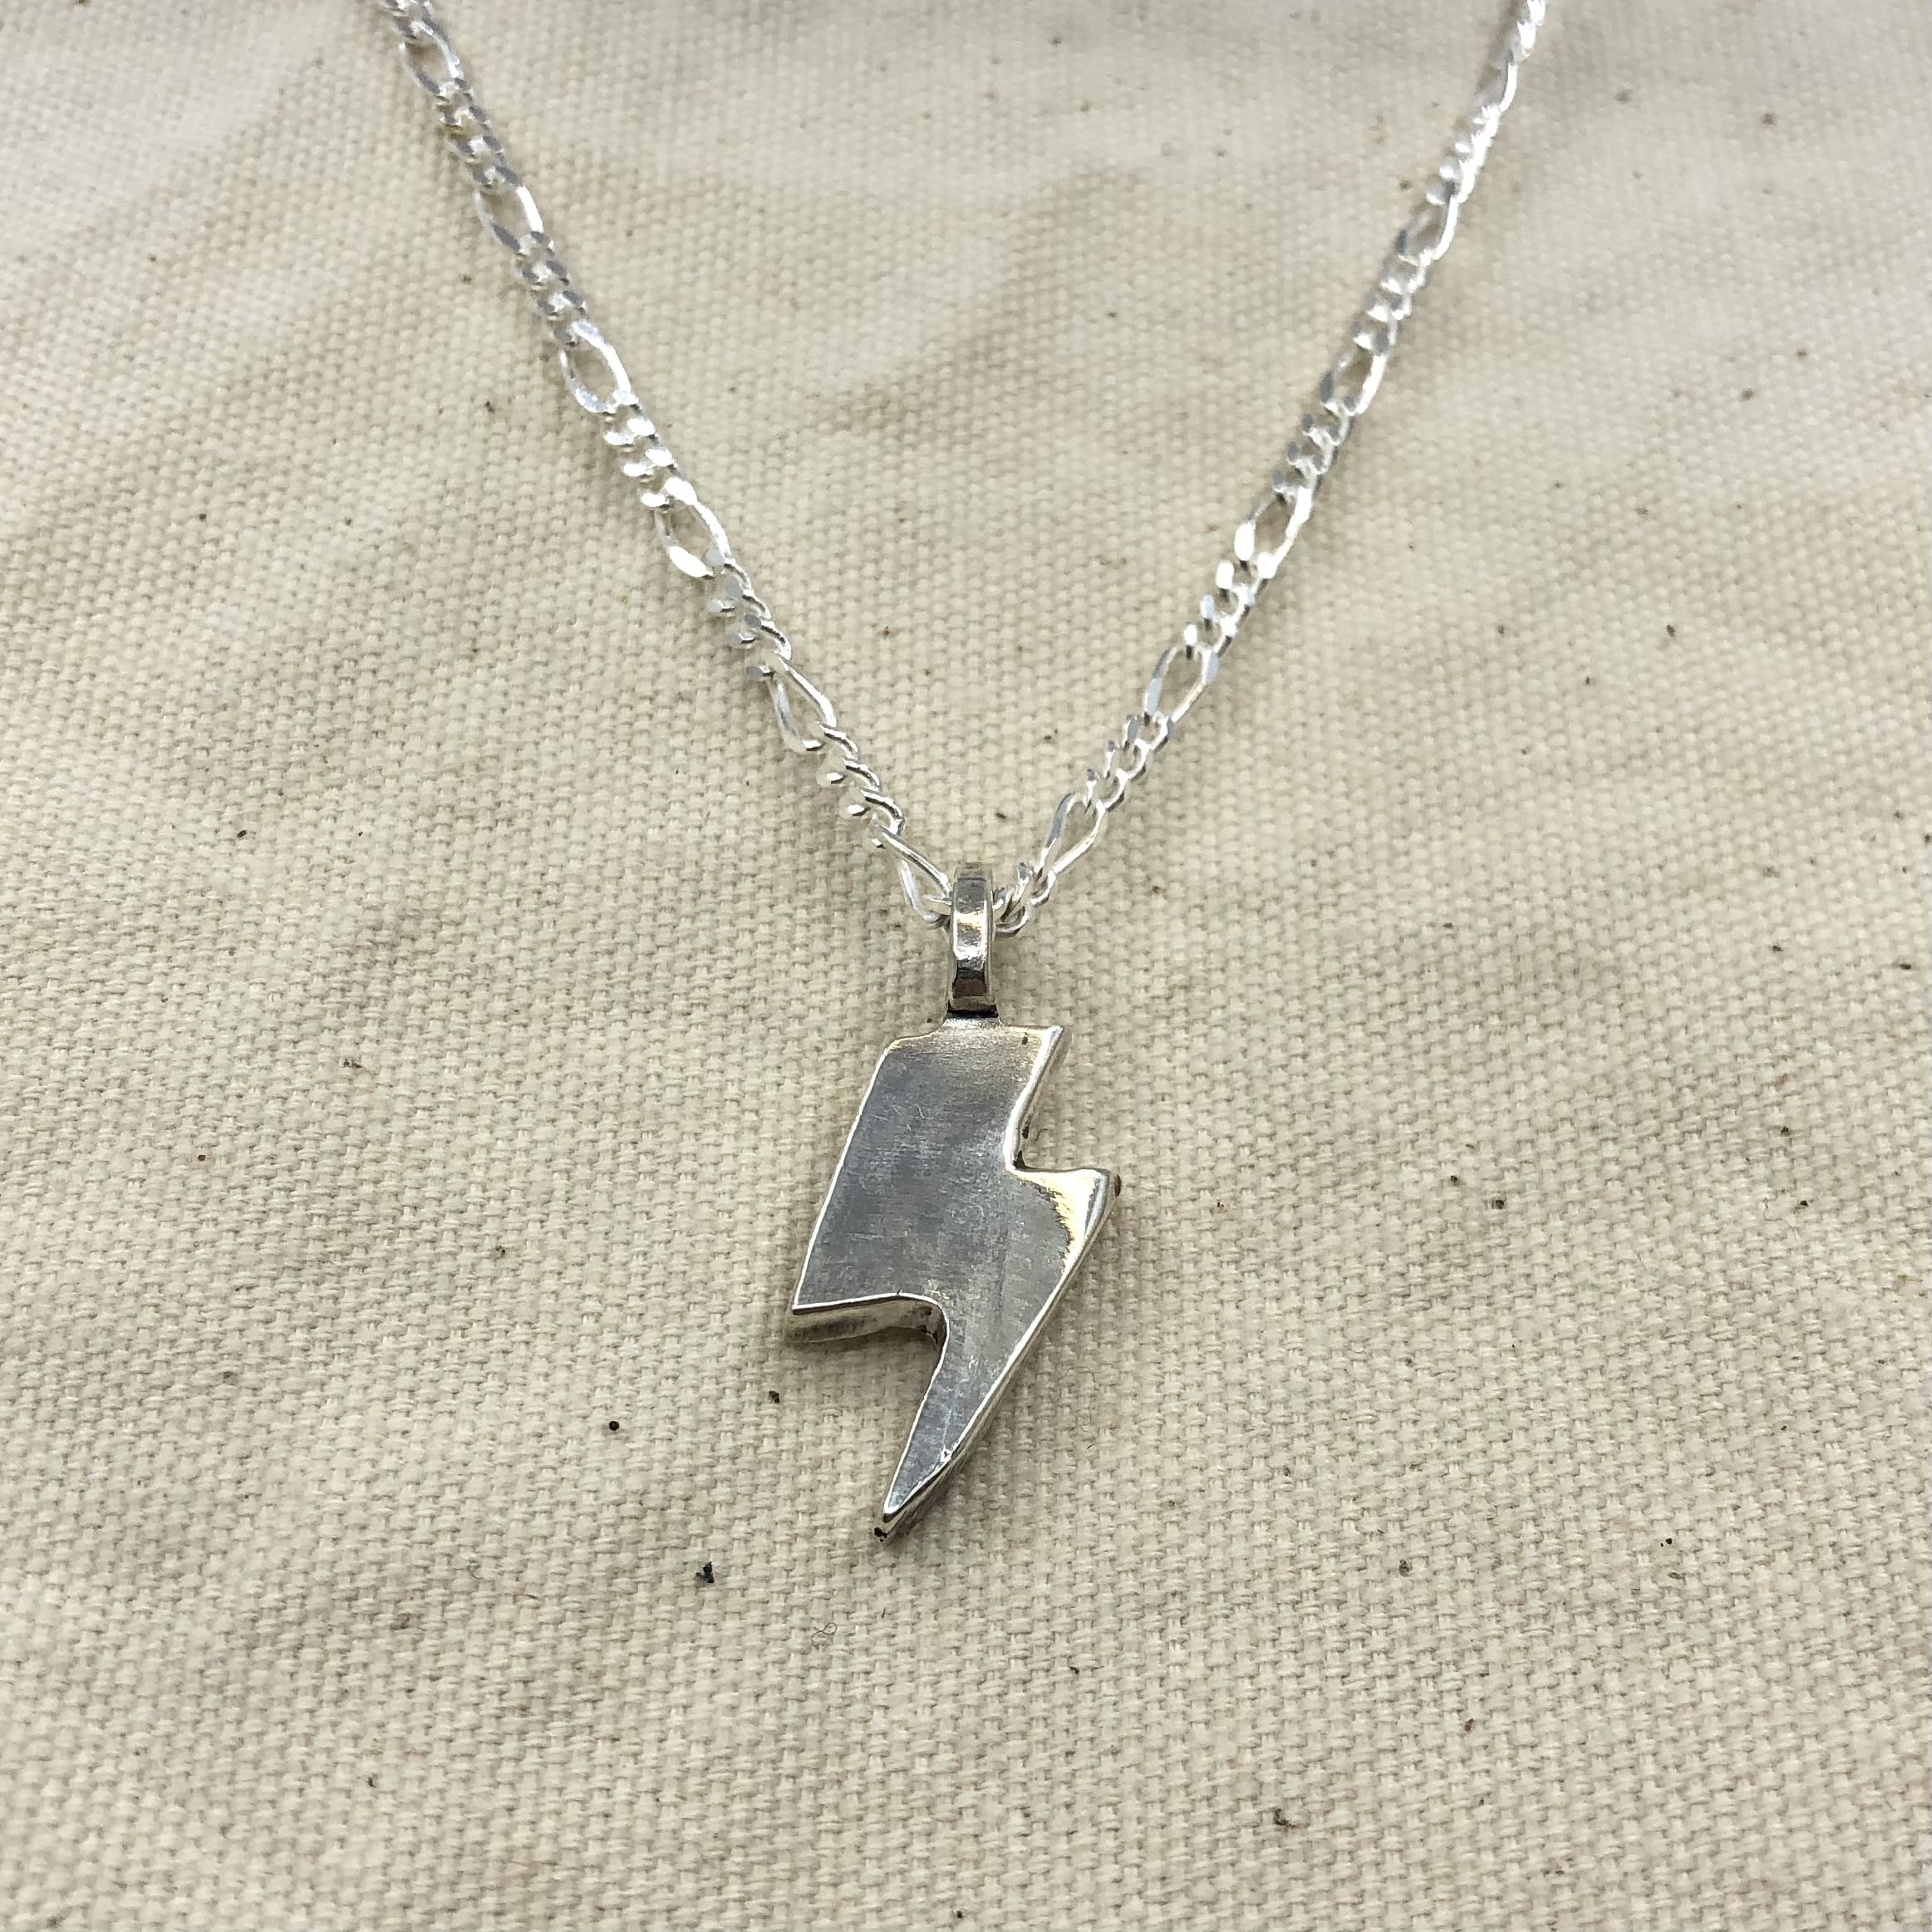 Silver Lightening Necklace NC5390 - Diamond T Outfitters